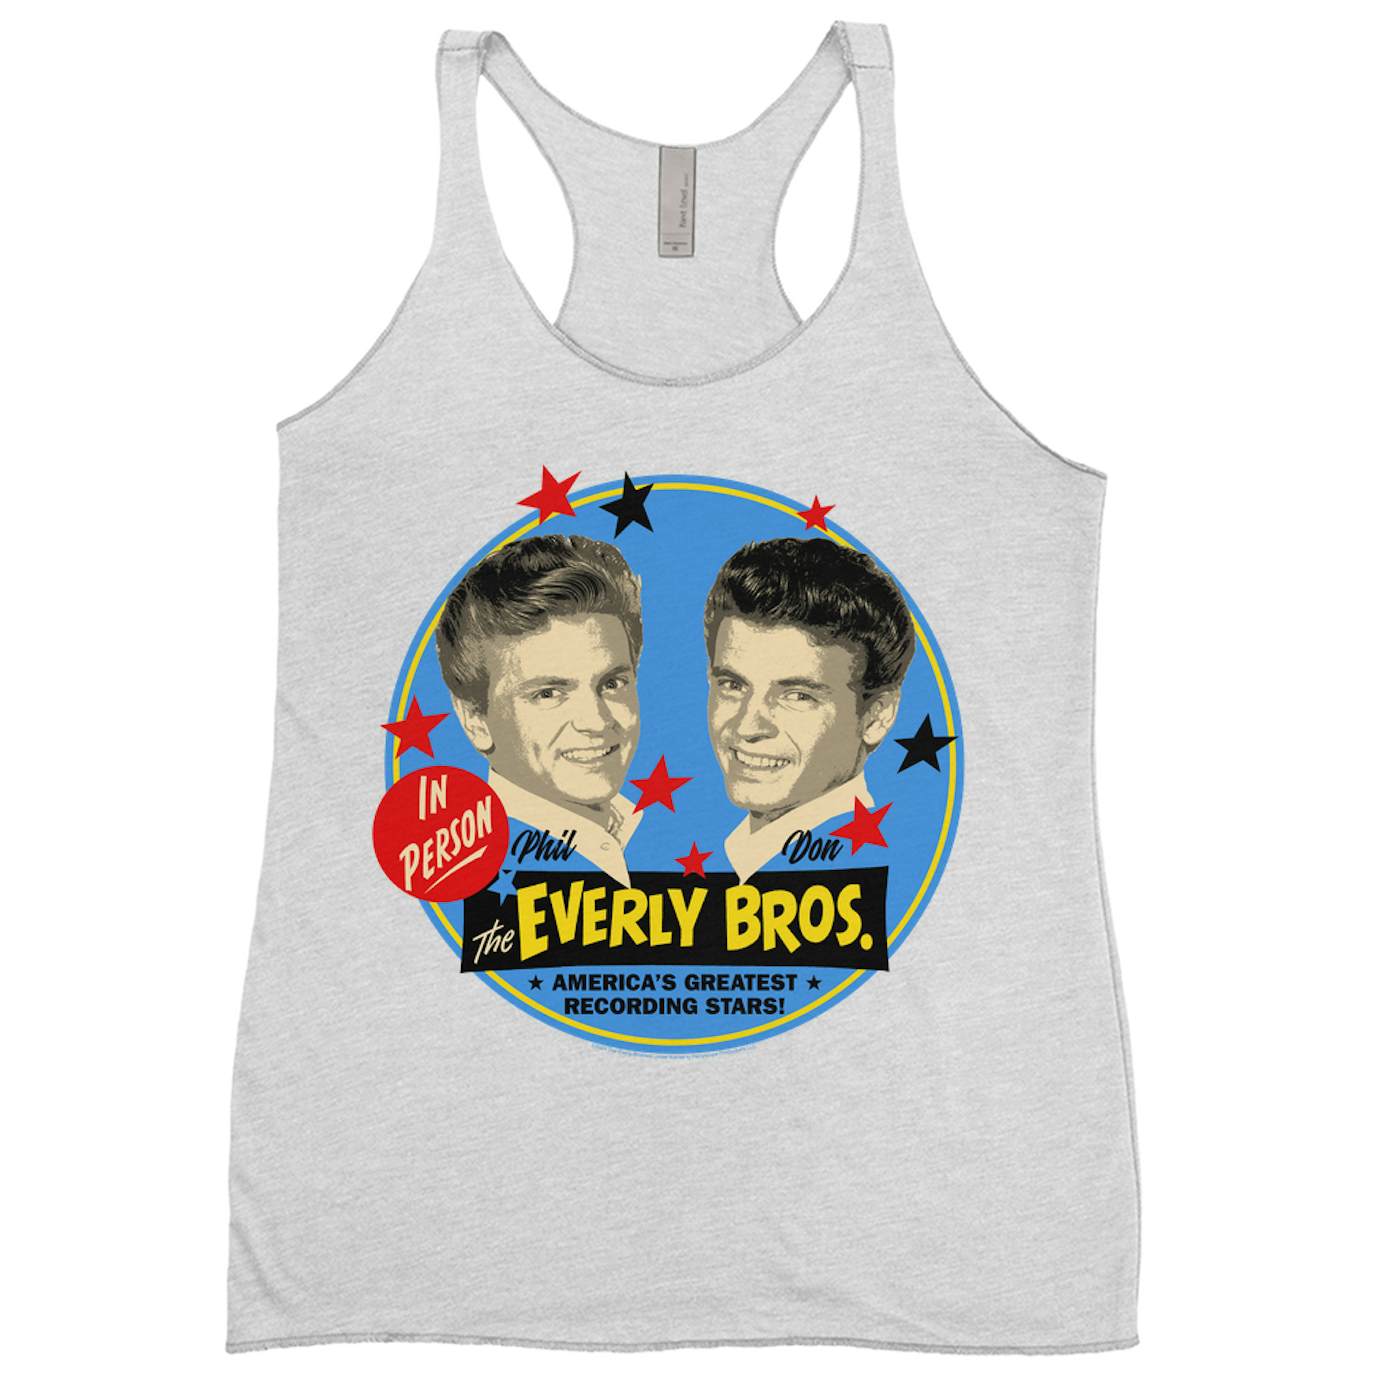 The Everly Brothers Ladies' Tank Top | America's Greatest Recording Stars Promotion Image The Everly Brothers Shirt